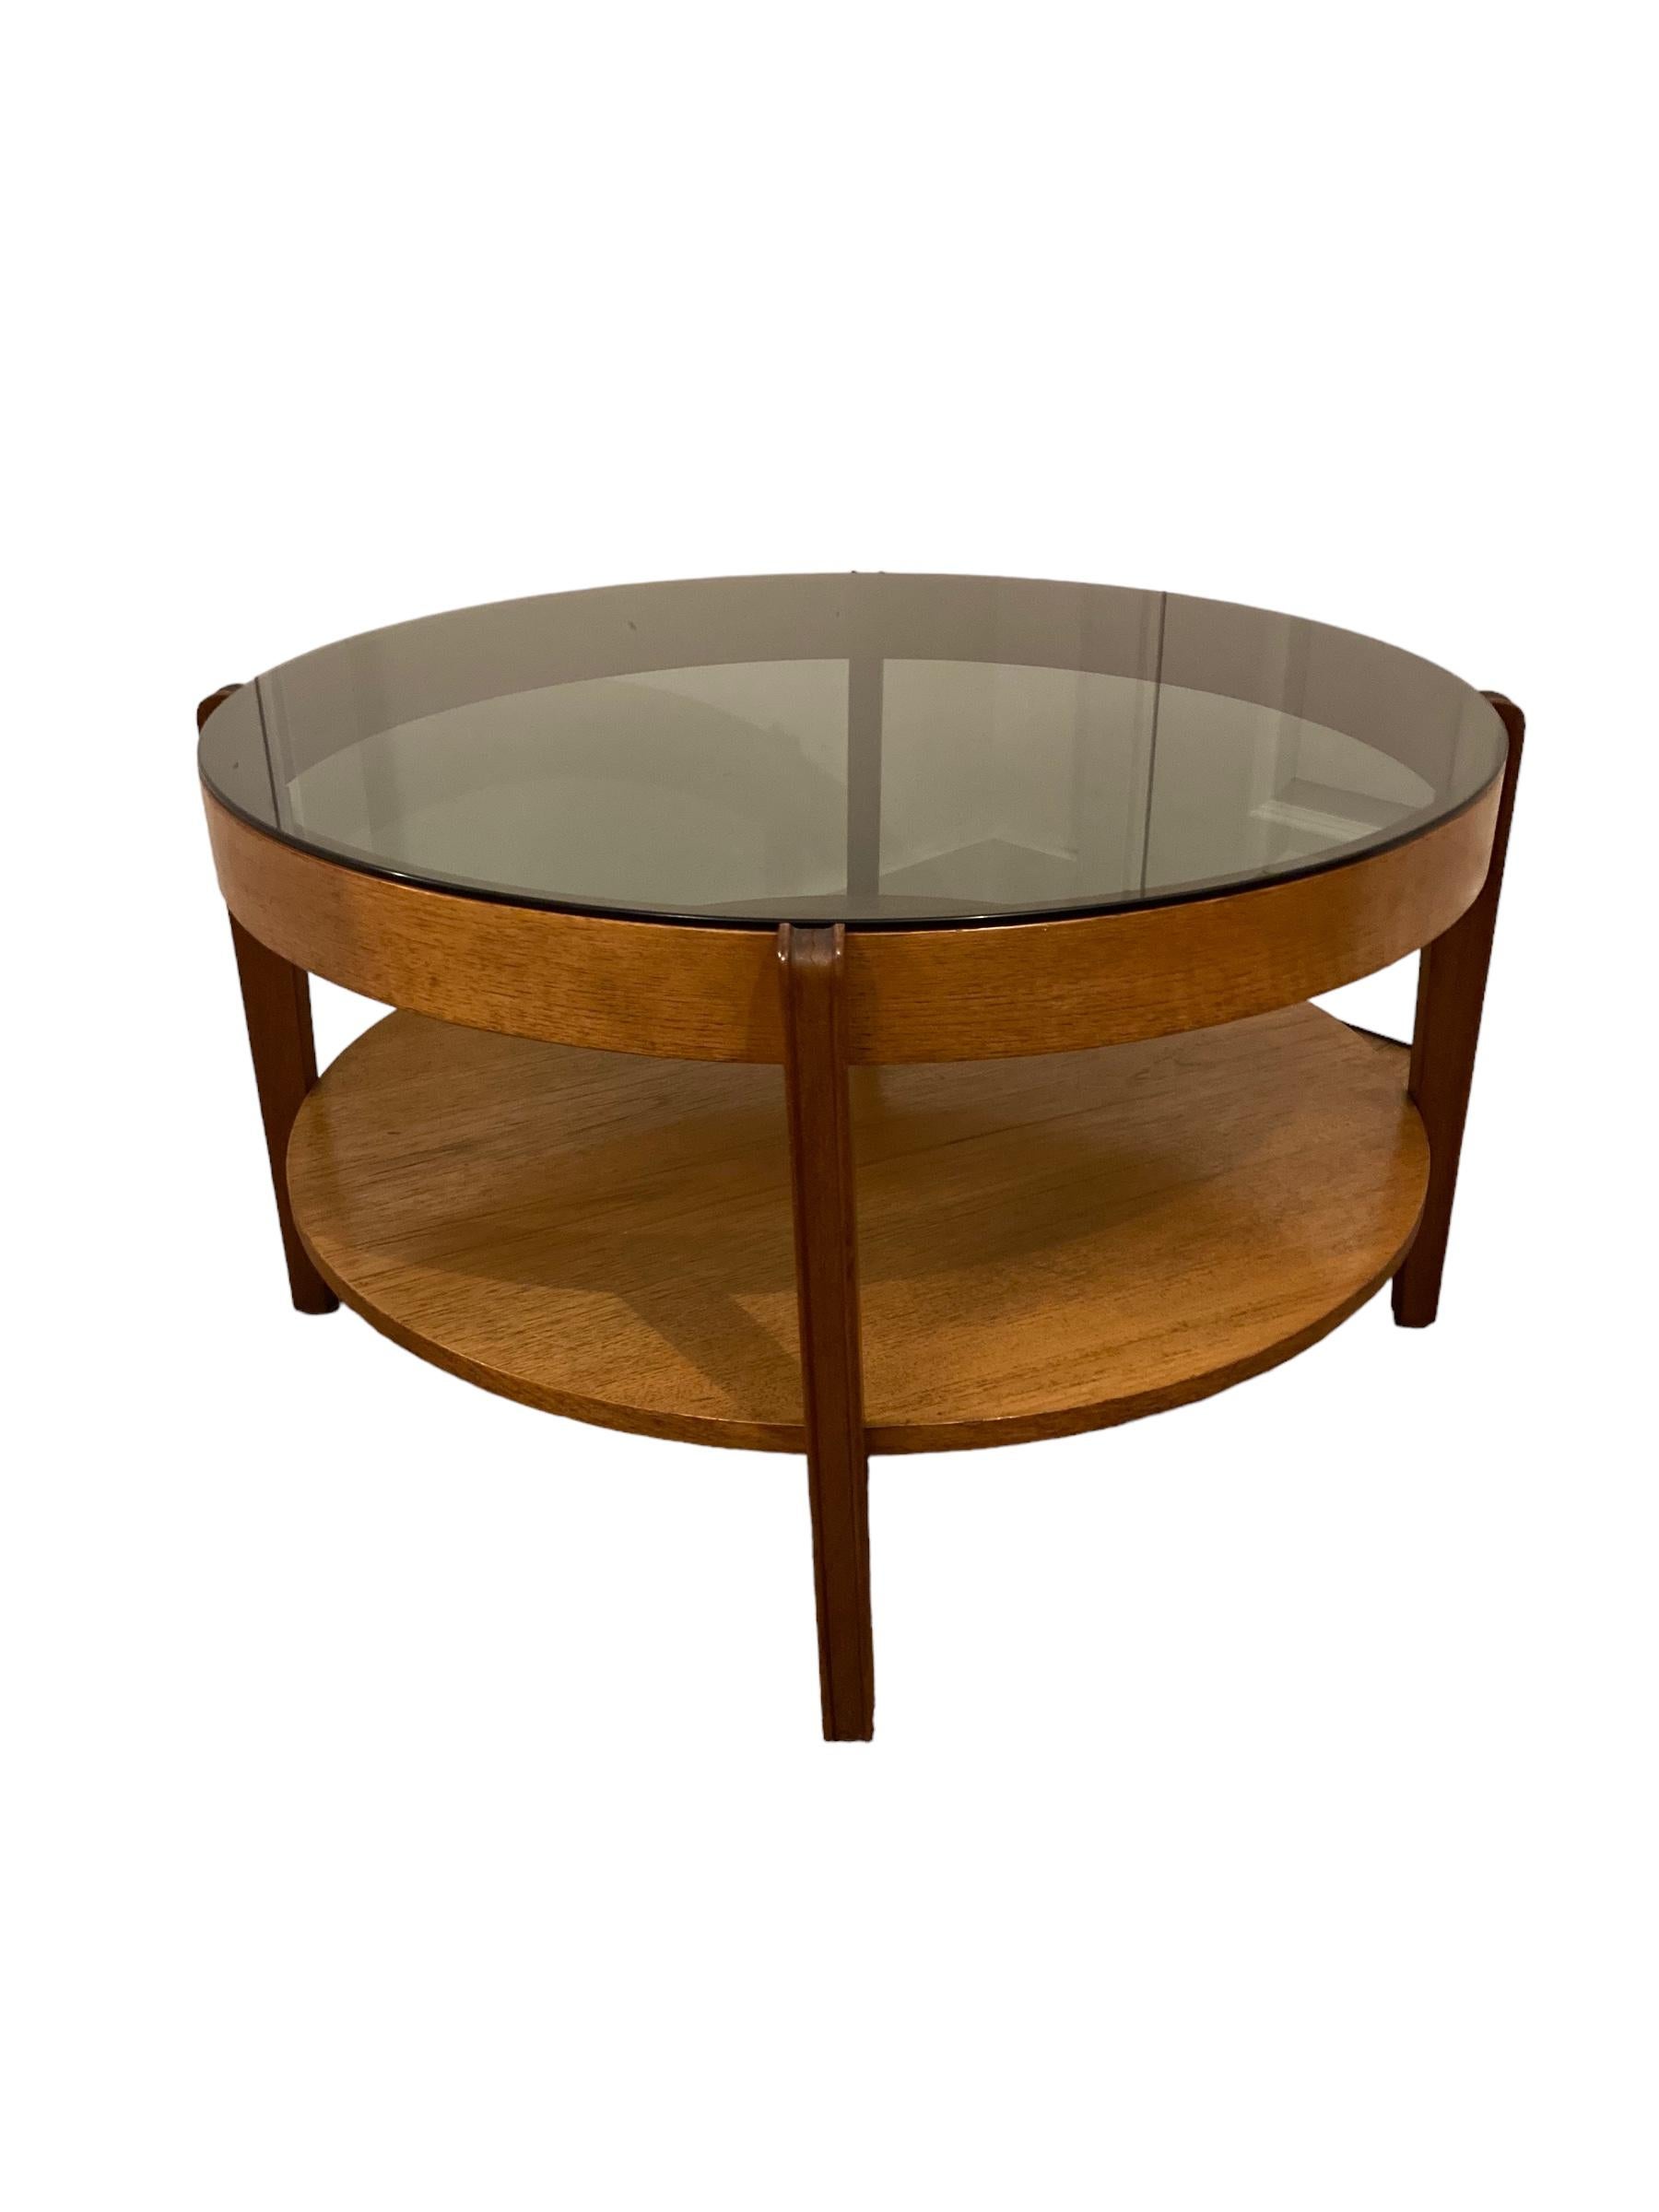 Glass Mid Century Modern round Teak Coffee Table, smoked glass by Remploy of England.